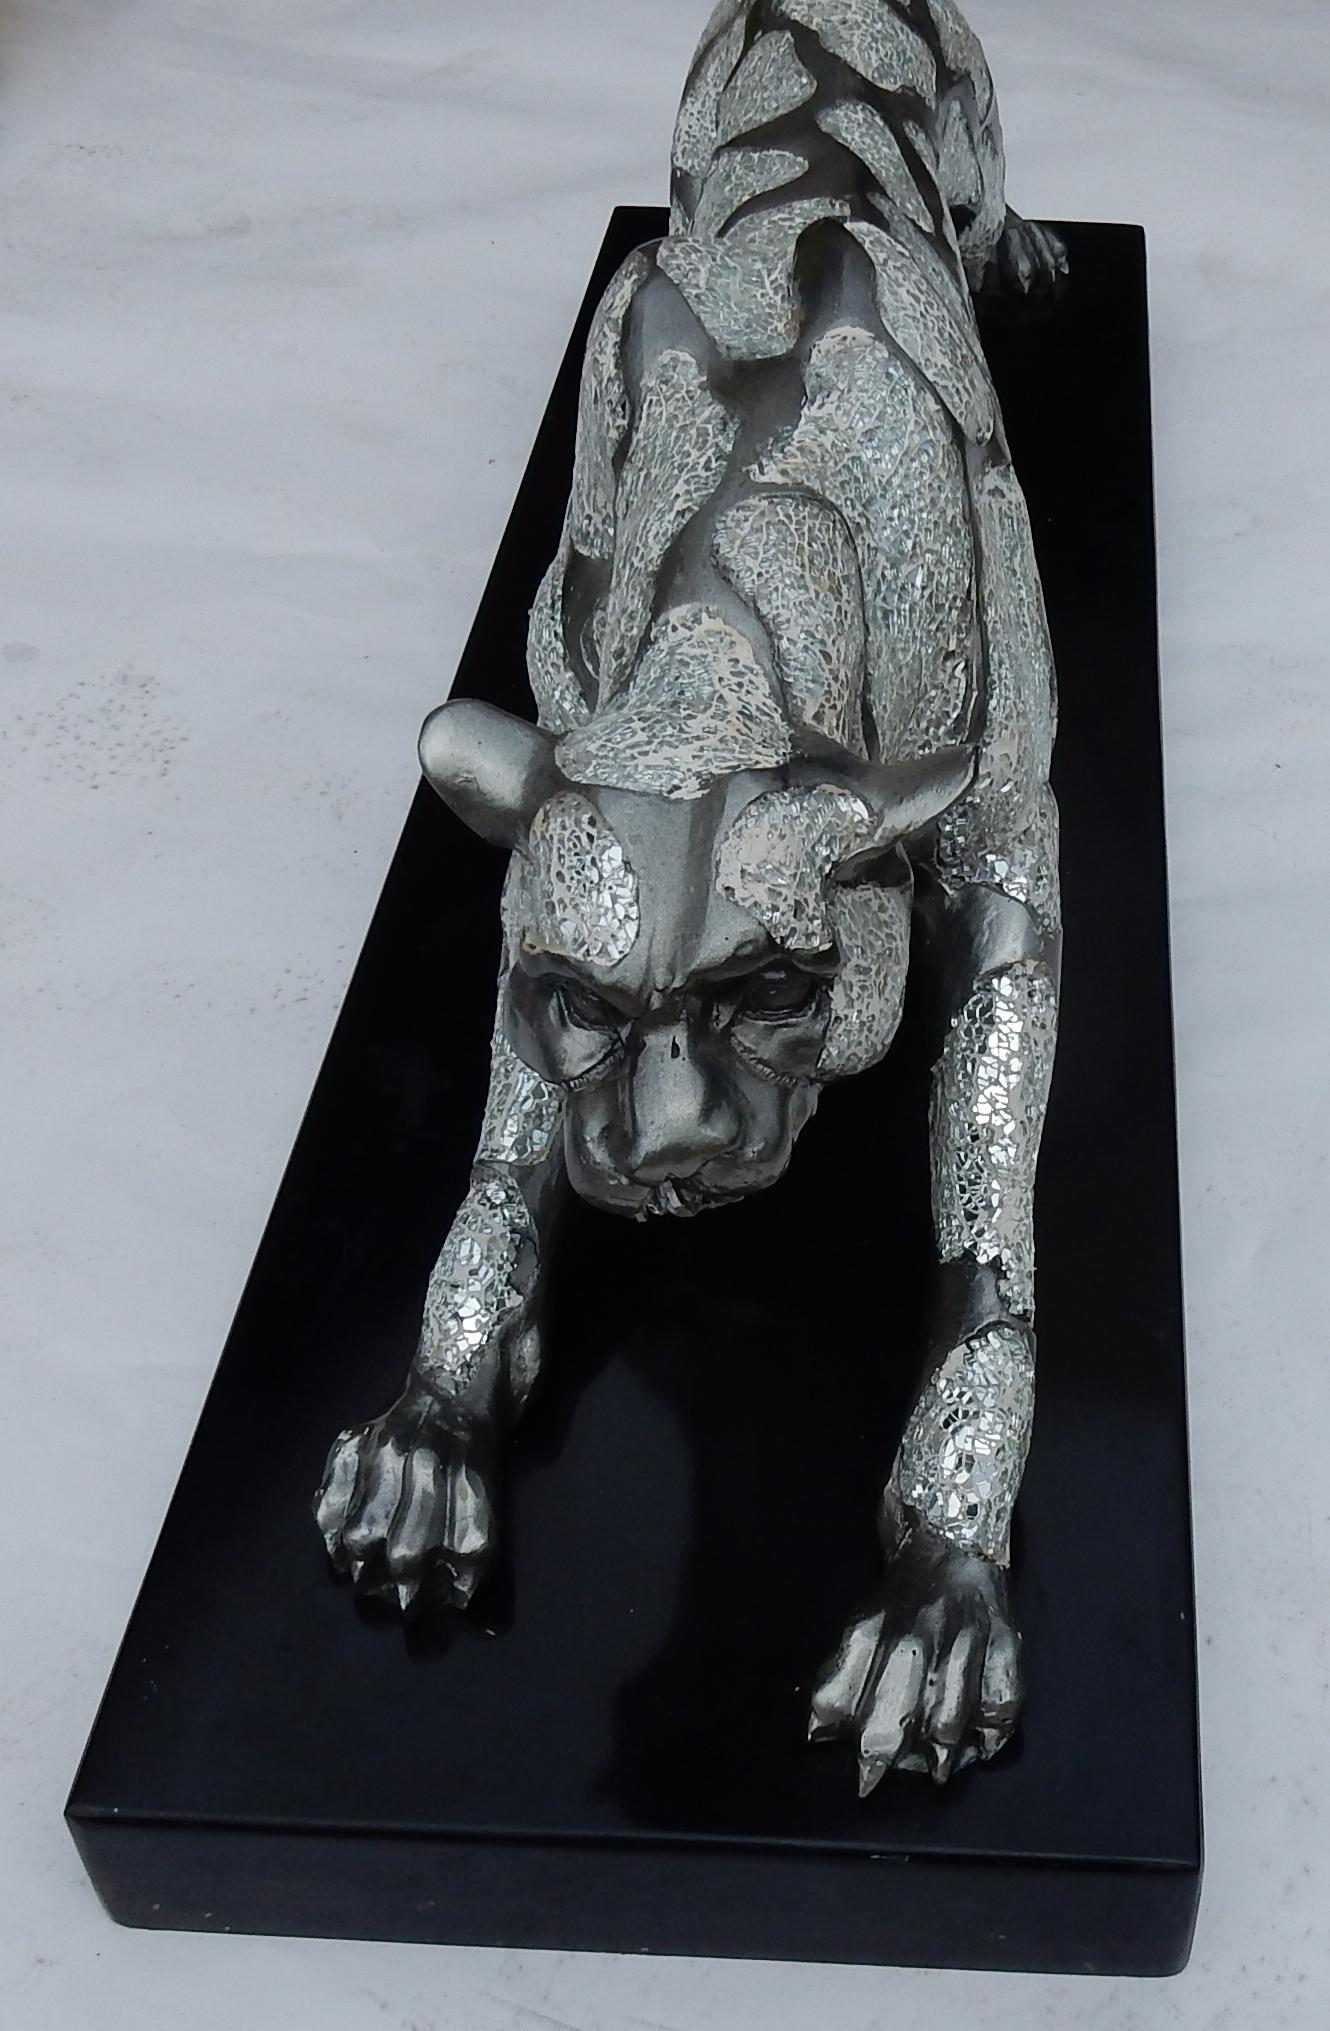 mirrored panther statue